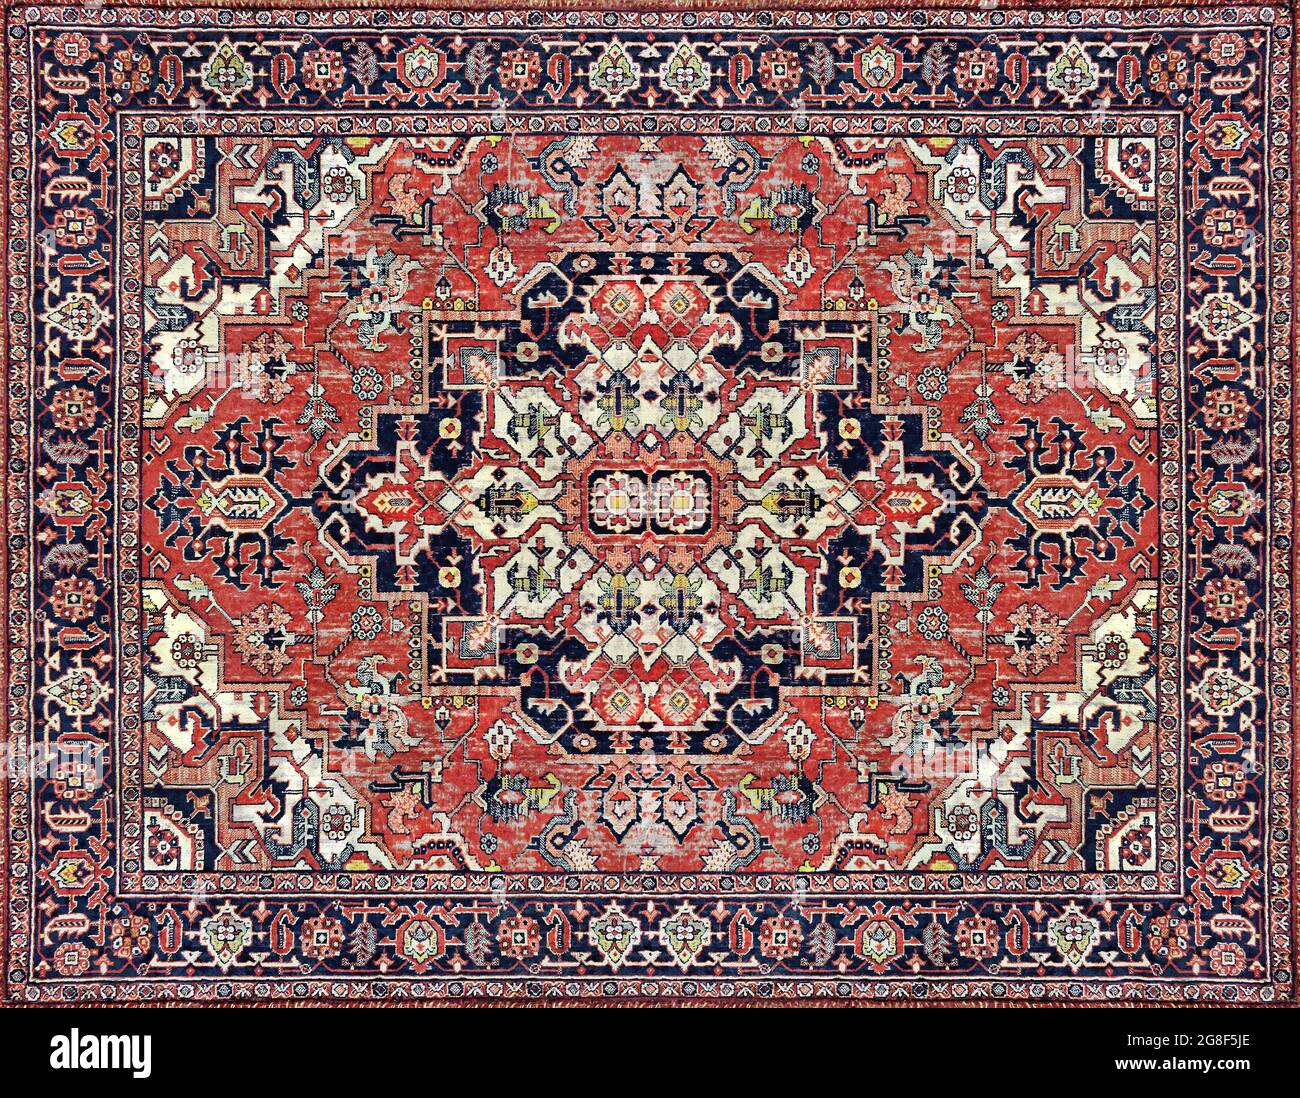 Old Persian Carpet Texture, abstract ornament milky blue Stock Photo - Alamy